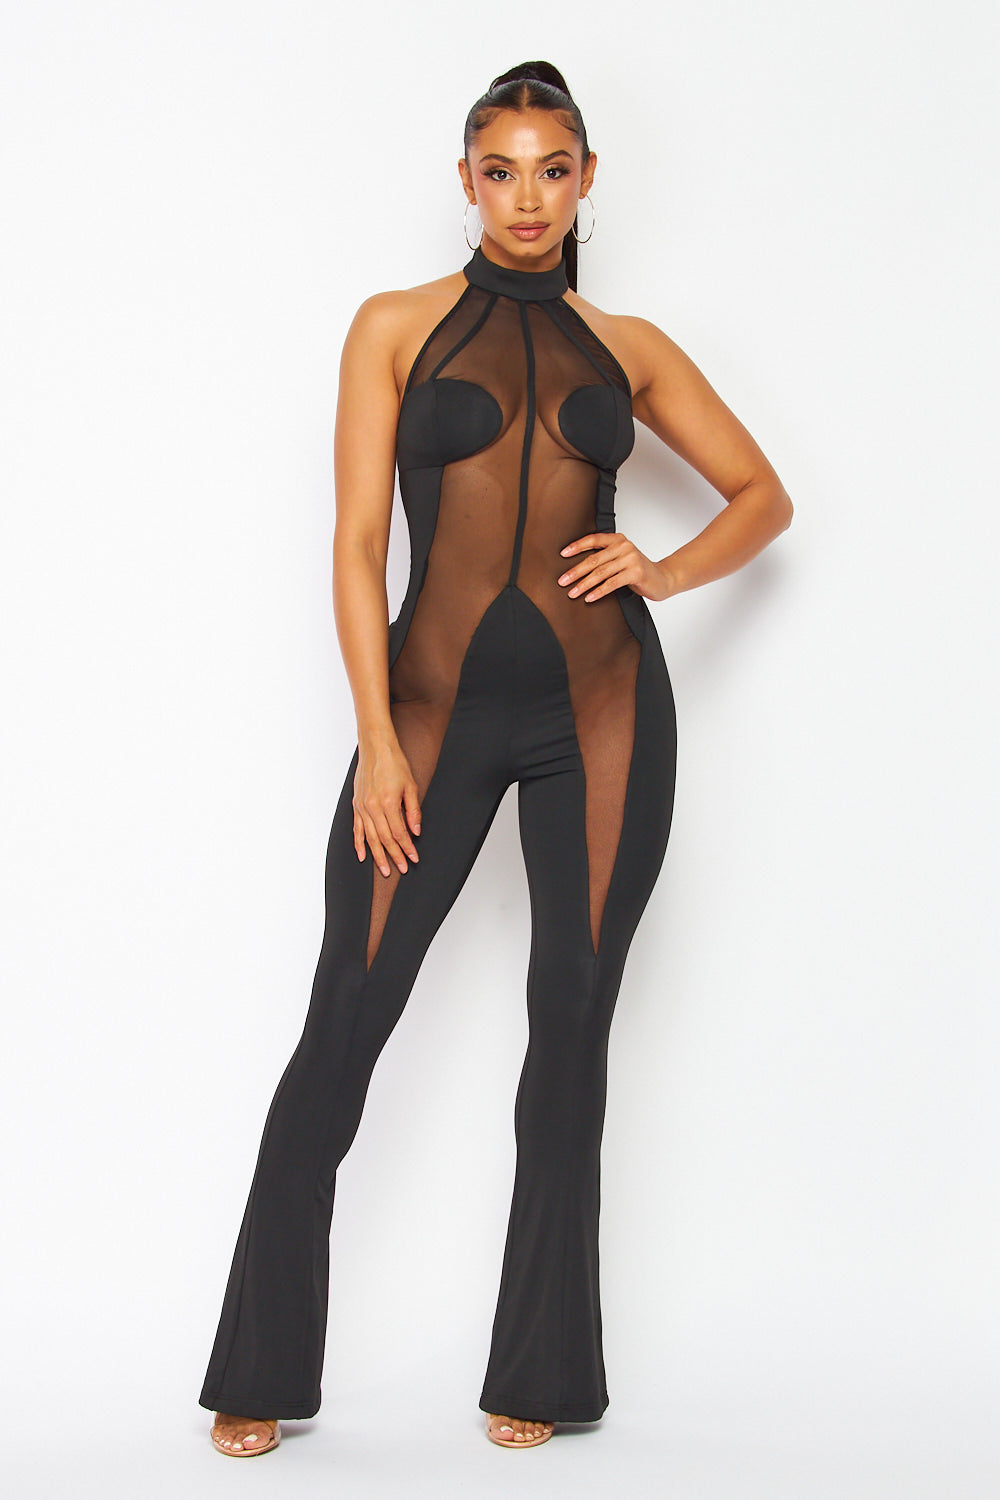 Nothing Personal Partially Sheer Mesh Jumpsuit